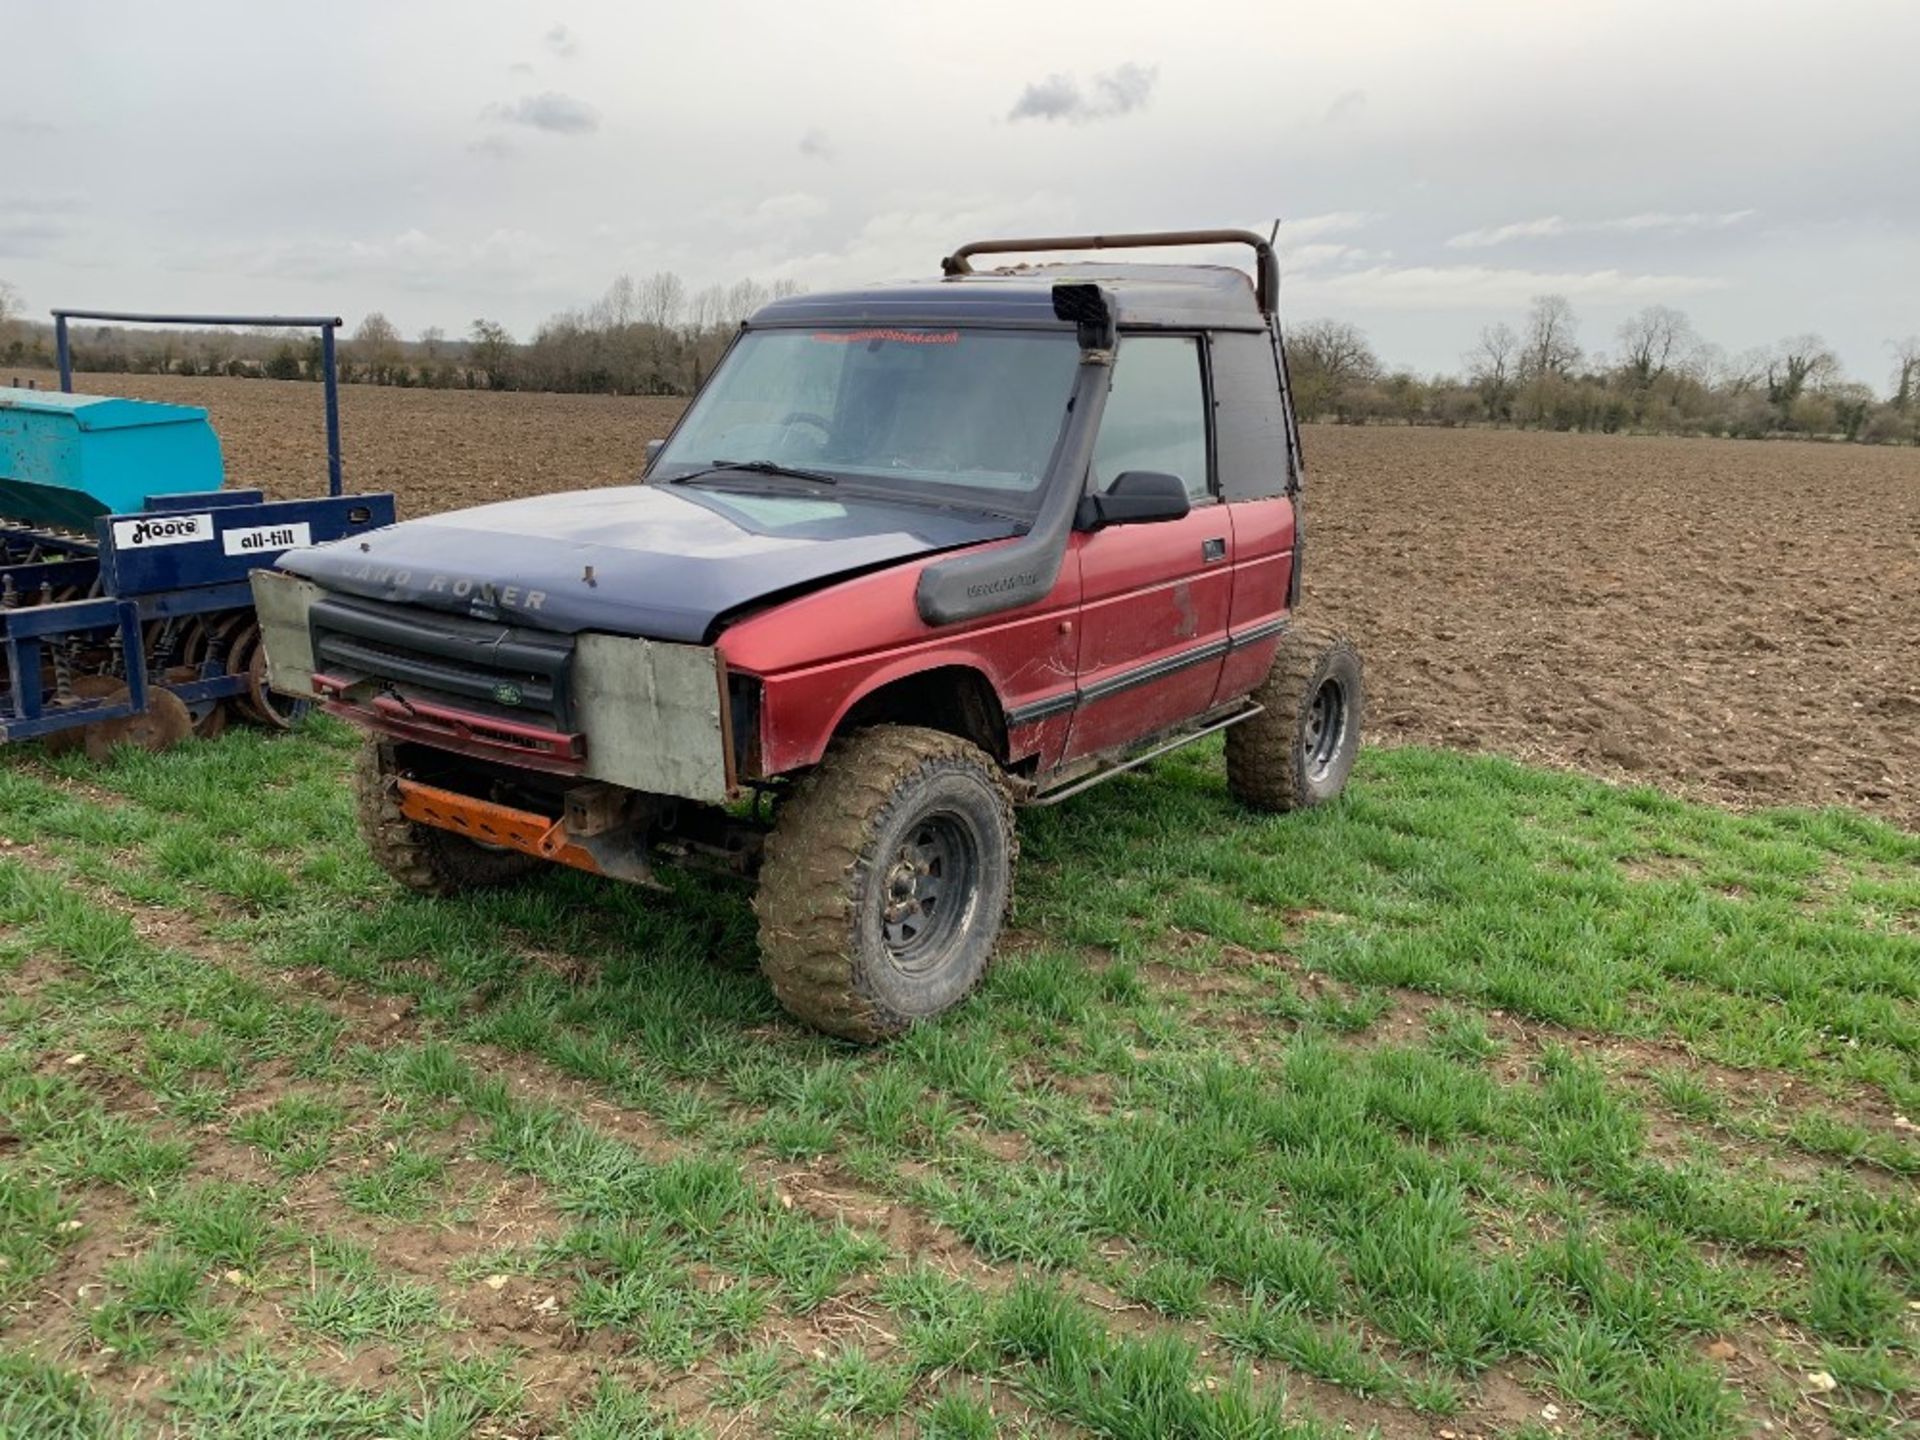 Land Rover Discovery 300tdi, no registration documents,